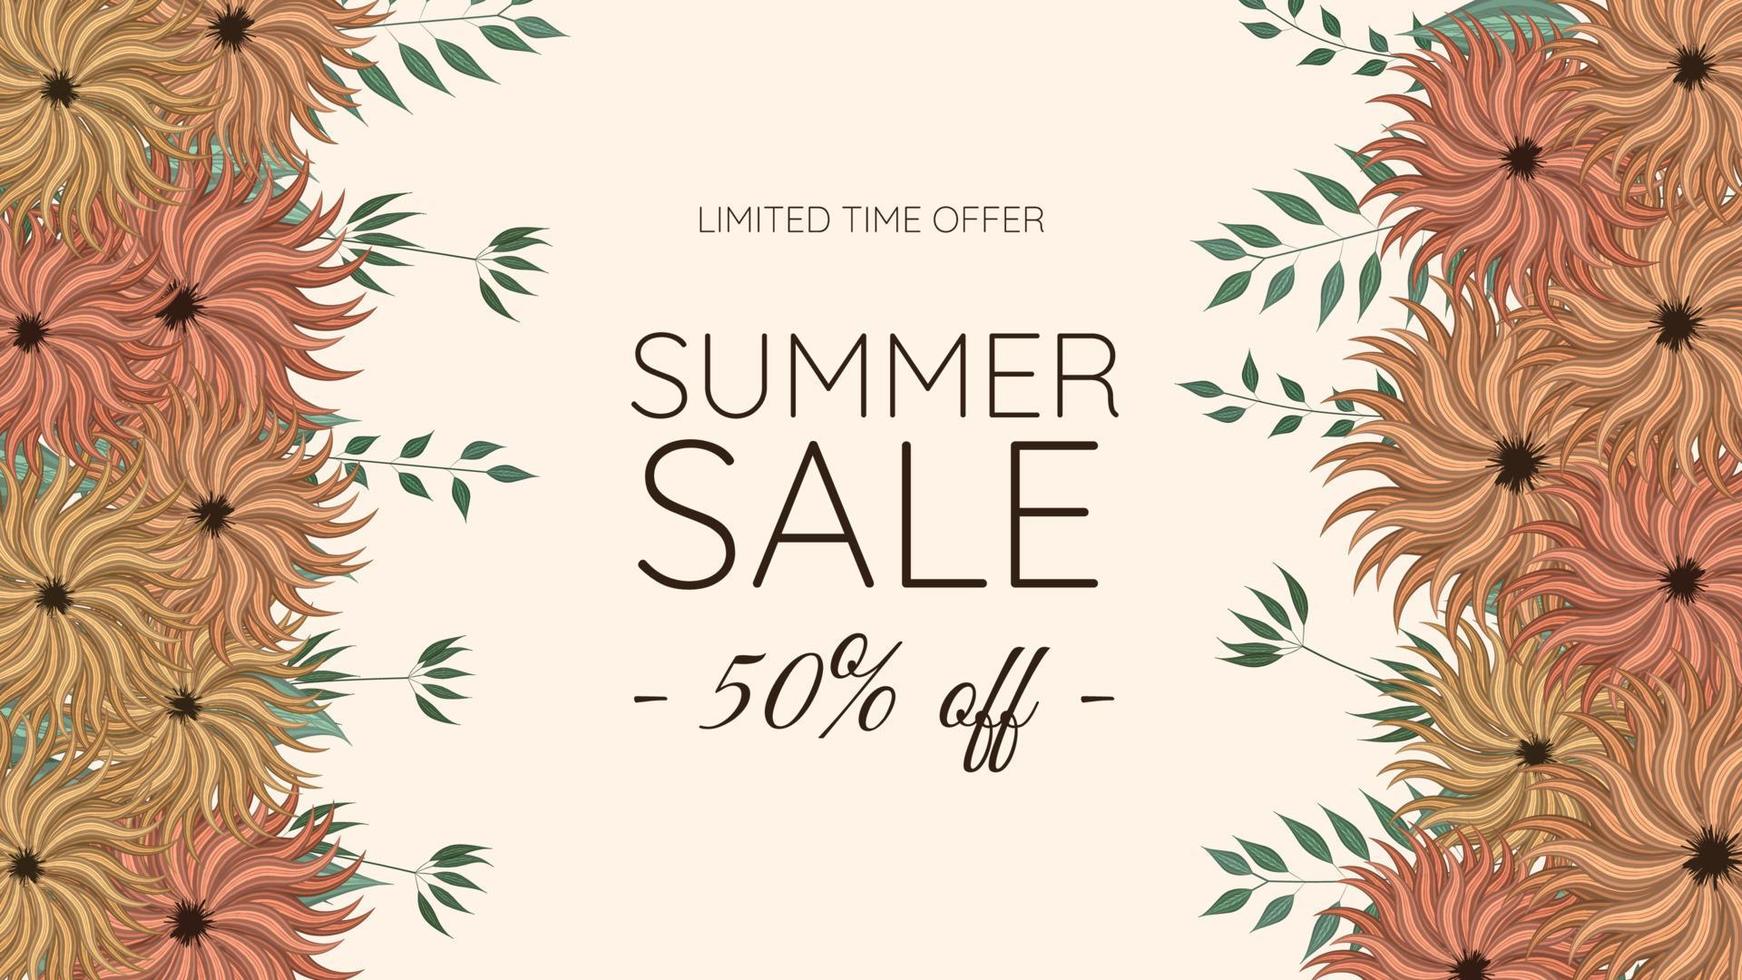 Hot Summer Sale Floral Flowers banner for vacation, weekend, holiday vector